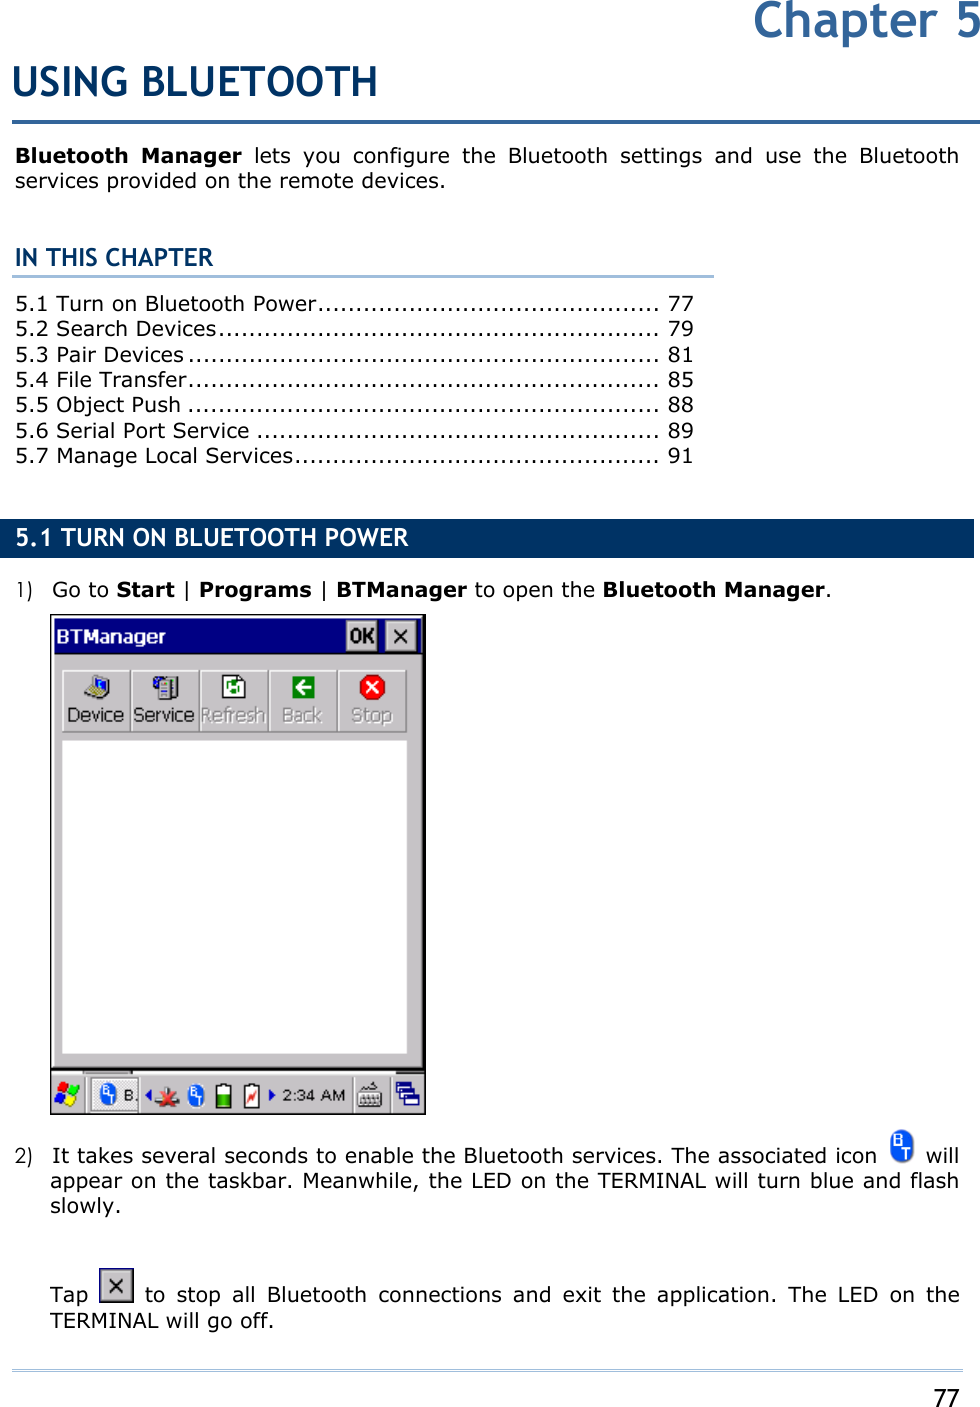     77   Bluetooth Manager lets you configure the Bluetooth settings and use the Bluetooth services provided on the remote devices.  IN THIS CHAPTER 5.1 Turn on Bluetooth Power............................................. 77 5.2 Search Devices.......................................................... 79 5.3 Pair Devices .............................................................. 81 5.4 File Transfer.............................................................. 85 5.5 Object Push .............................................................. 88 5.6 Serial Port Service ..................................................... 89 5.7 Manage Local Services................................................ 91  5.1 TURN ON BLUETOOTH POWER 1)  Go to Start | Programs | BTManager to open the Bluetooth Manager.   2)  It takes several seconds to enable the Bluetooth services. The associated icon   will appear on the taskbar. Meanwhile, the LED on the TERMINAL will turn blue and flash slowly.   Tap   to stop all Bluetooth connections and exit the application. The LED on the TERMINAL will go off. Chapter 5USING BLUETOOTH 